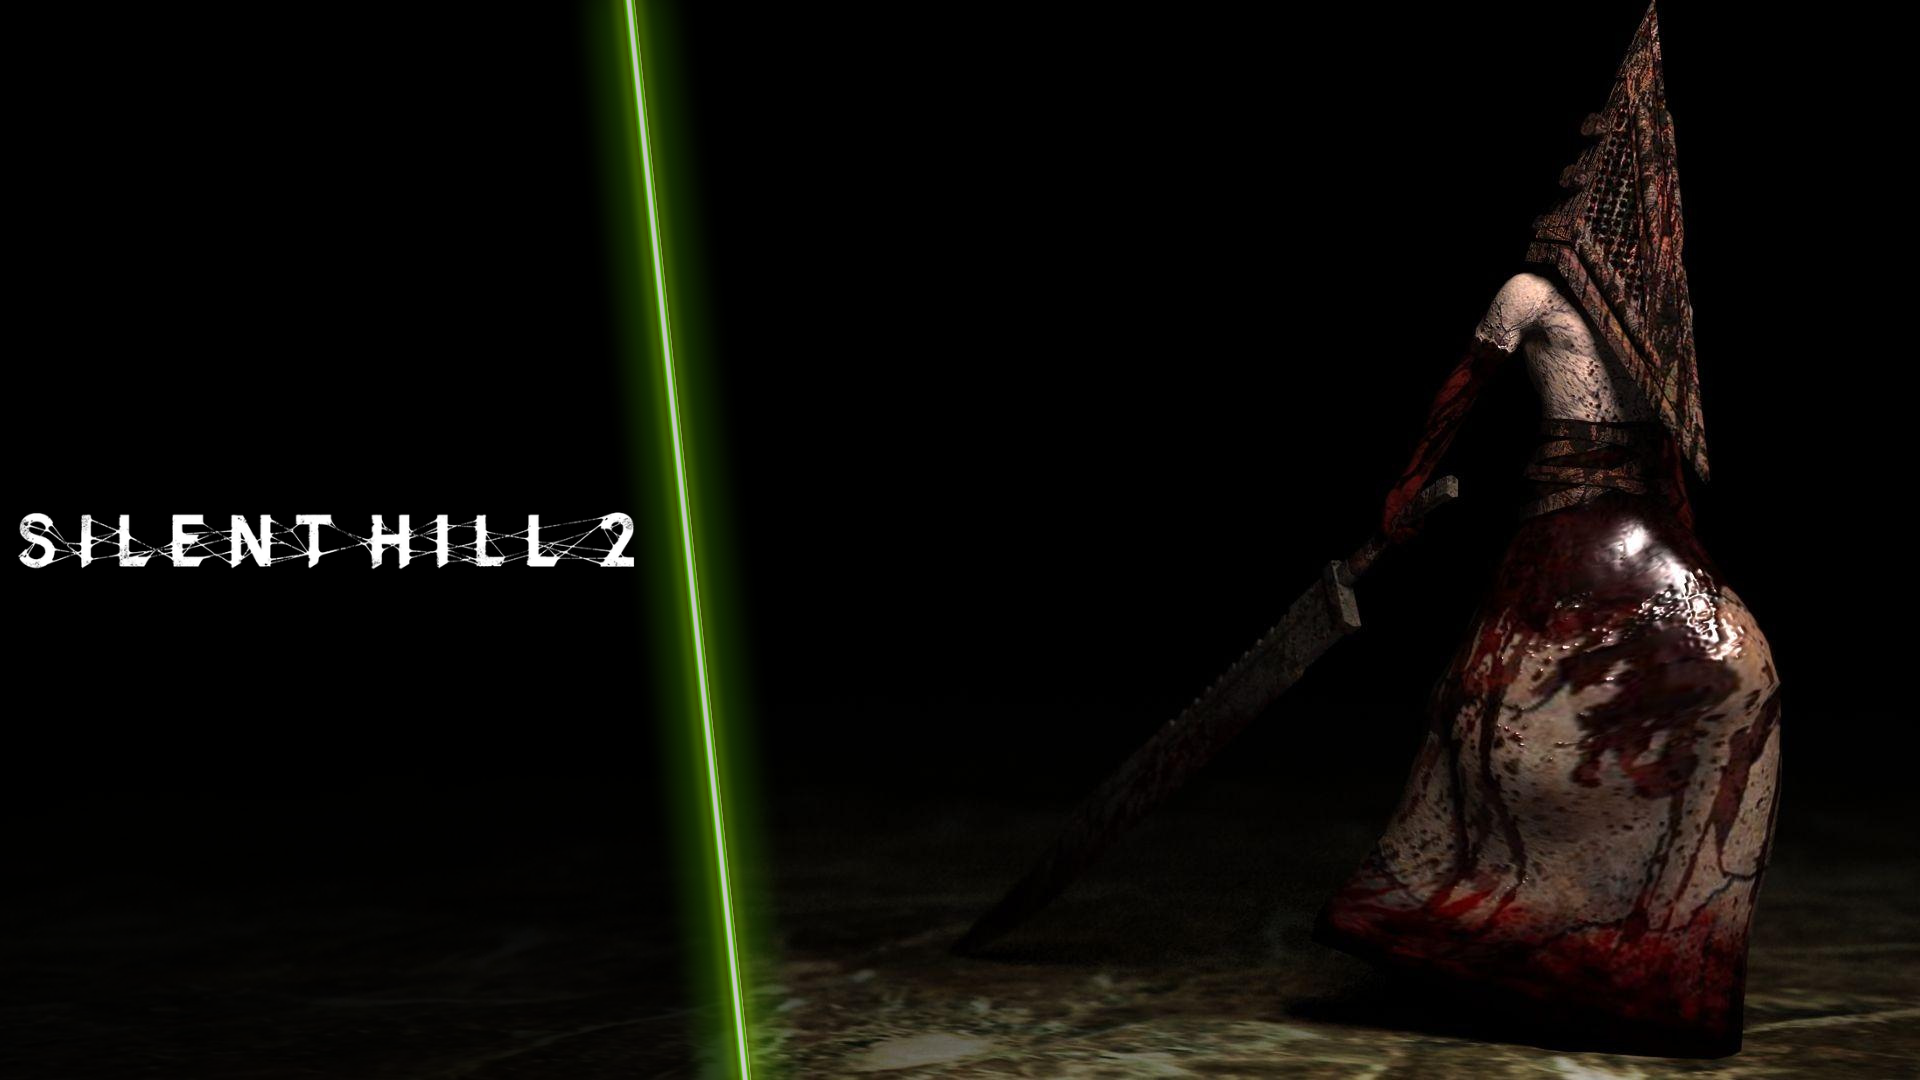 Will We See Pyramid Head's Origin Story in the Silent Hill 2 Remake?